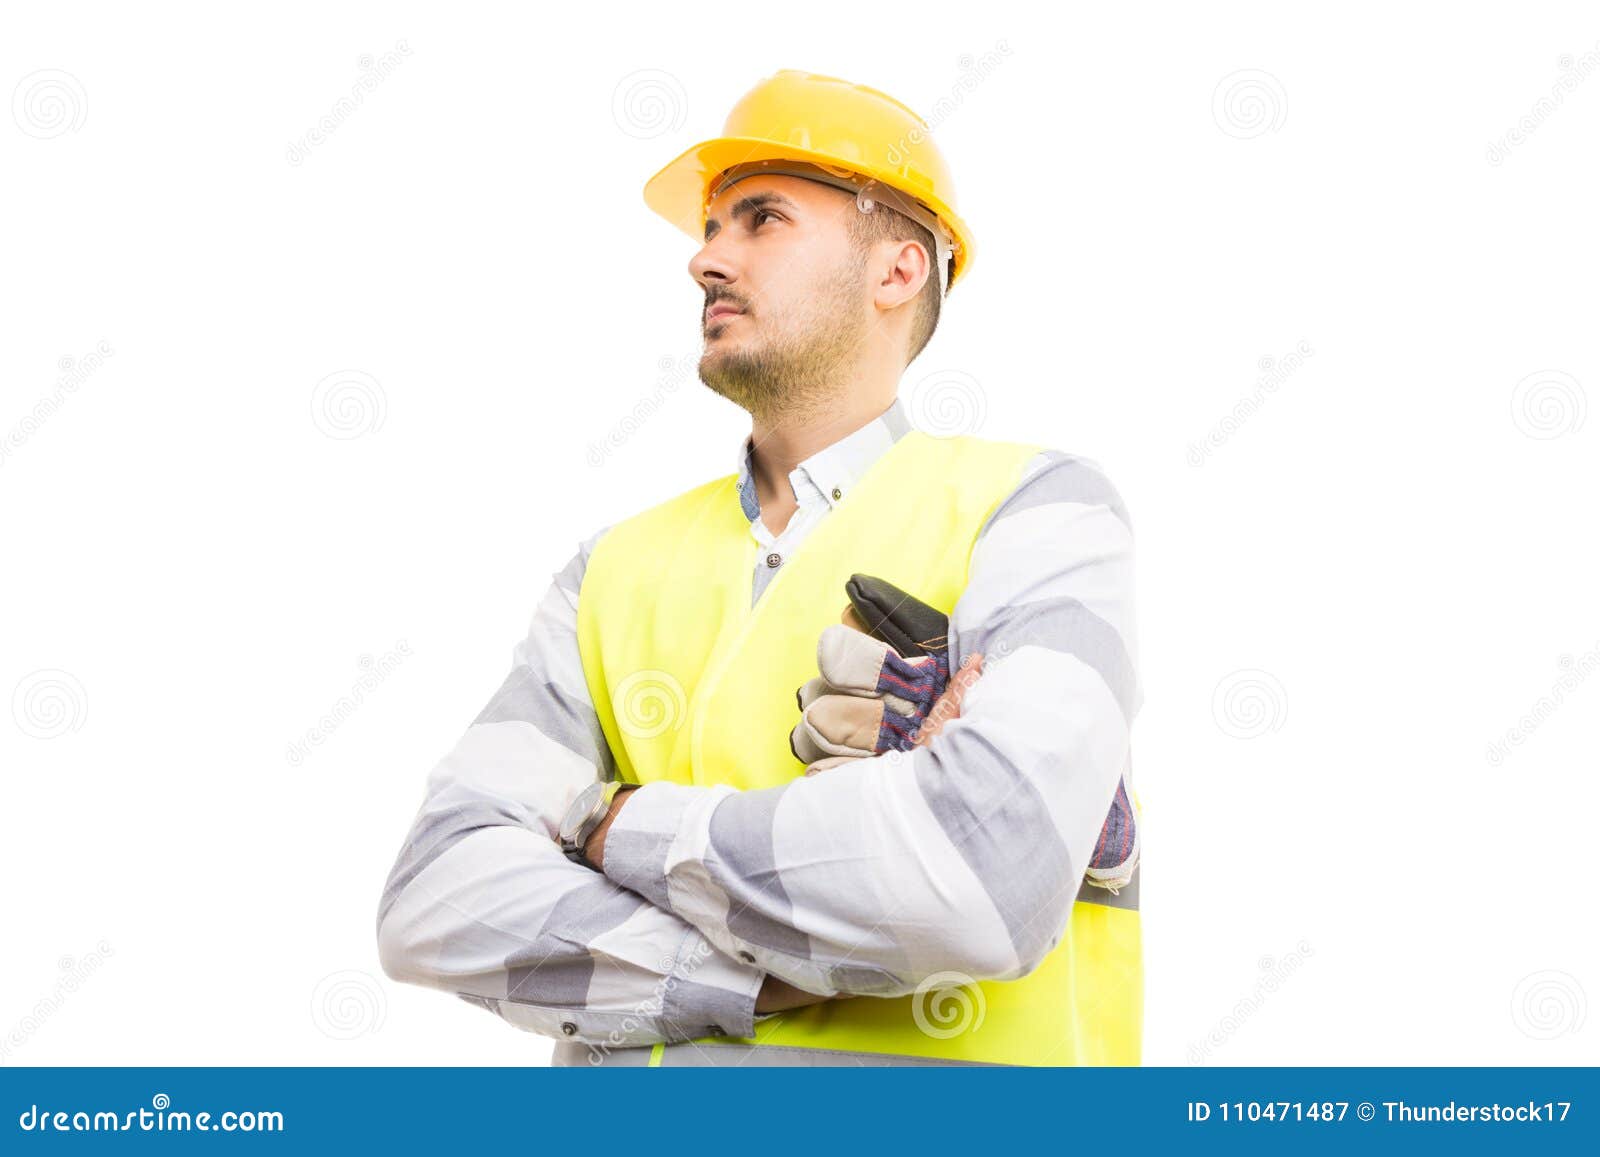 Visionary Architect or Builder Looking Up Stock Image - Image of ...